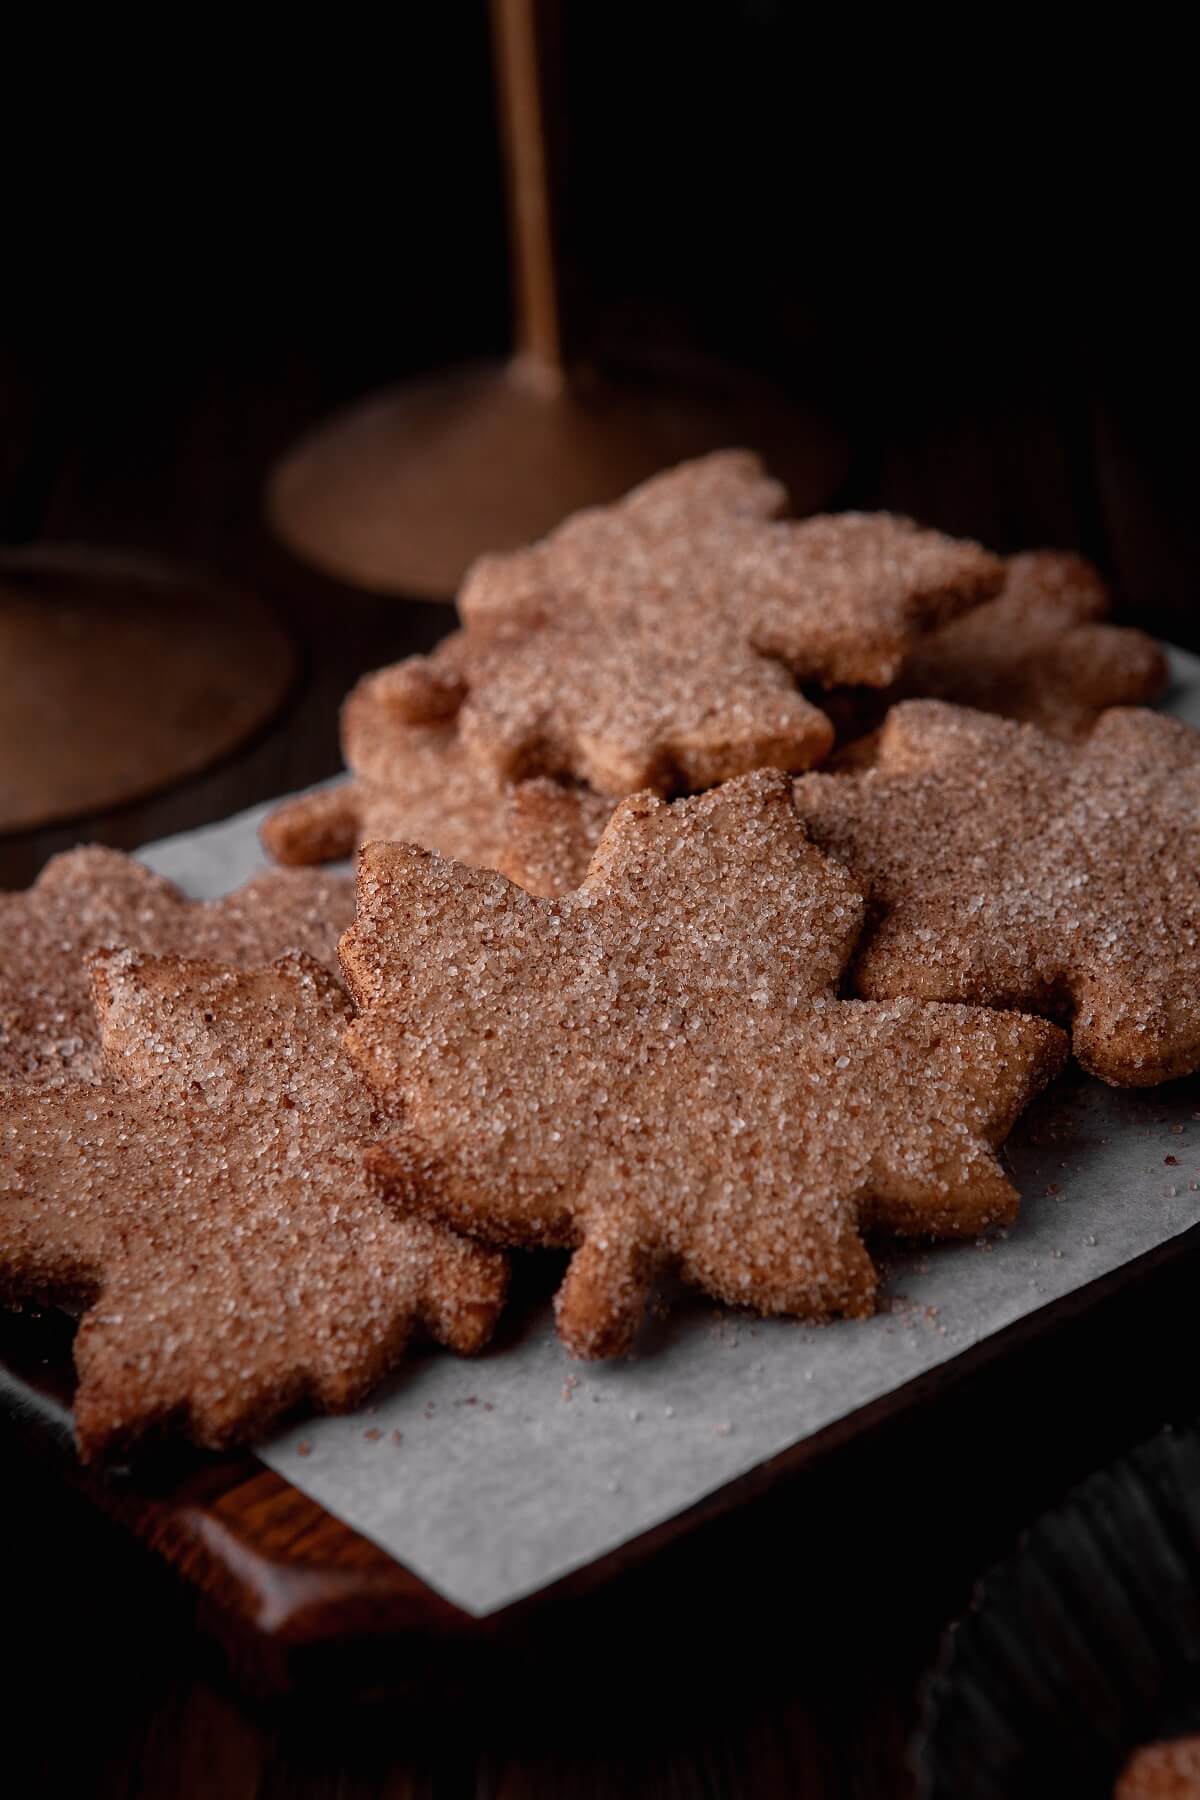 Parchment paper covered with leaf shaped Walnut Cookies coated in cinnamon sugar.